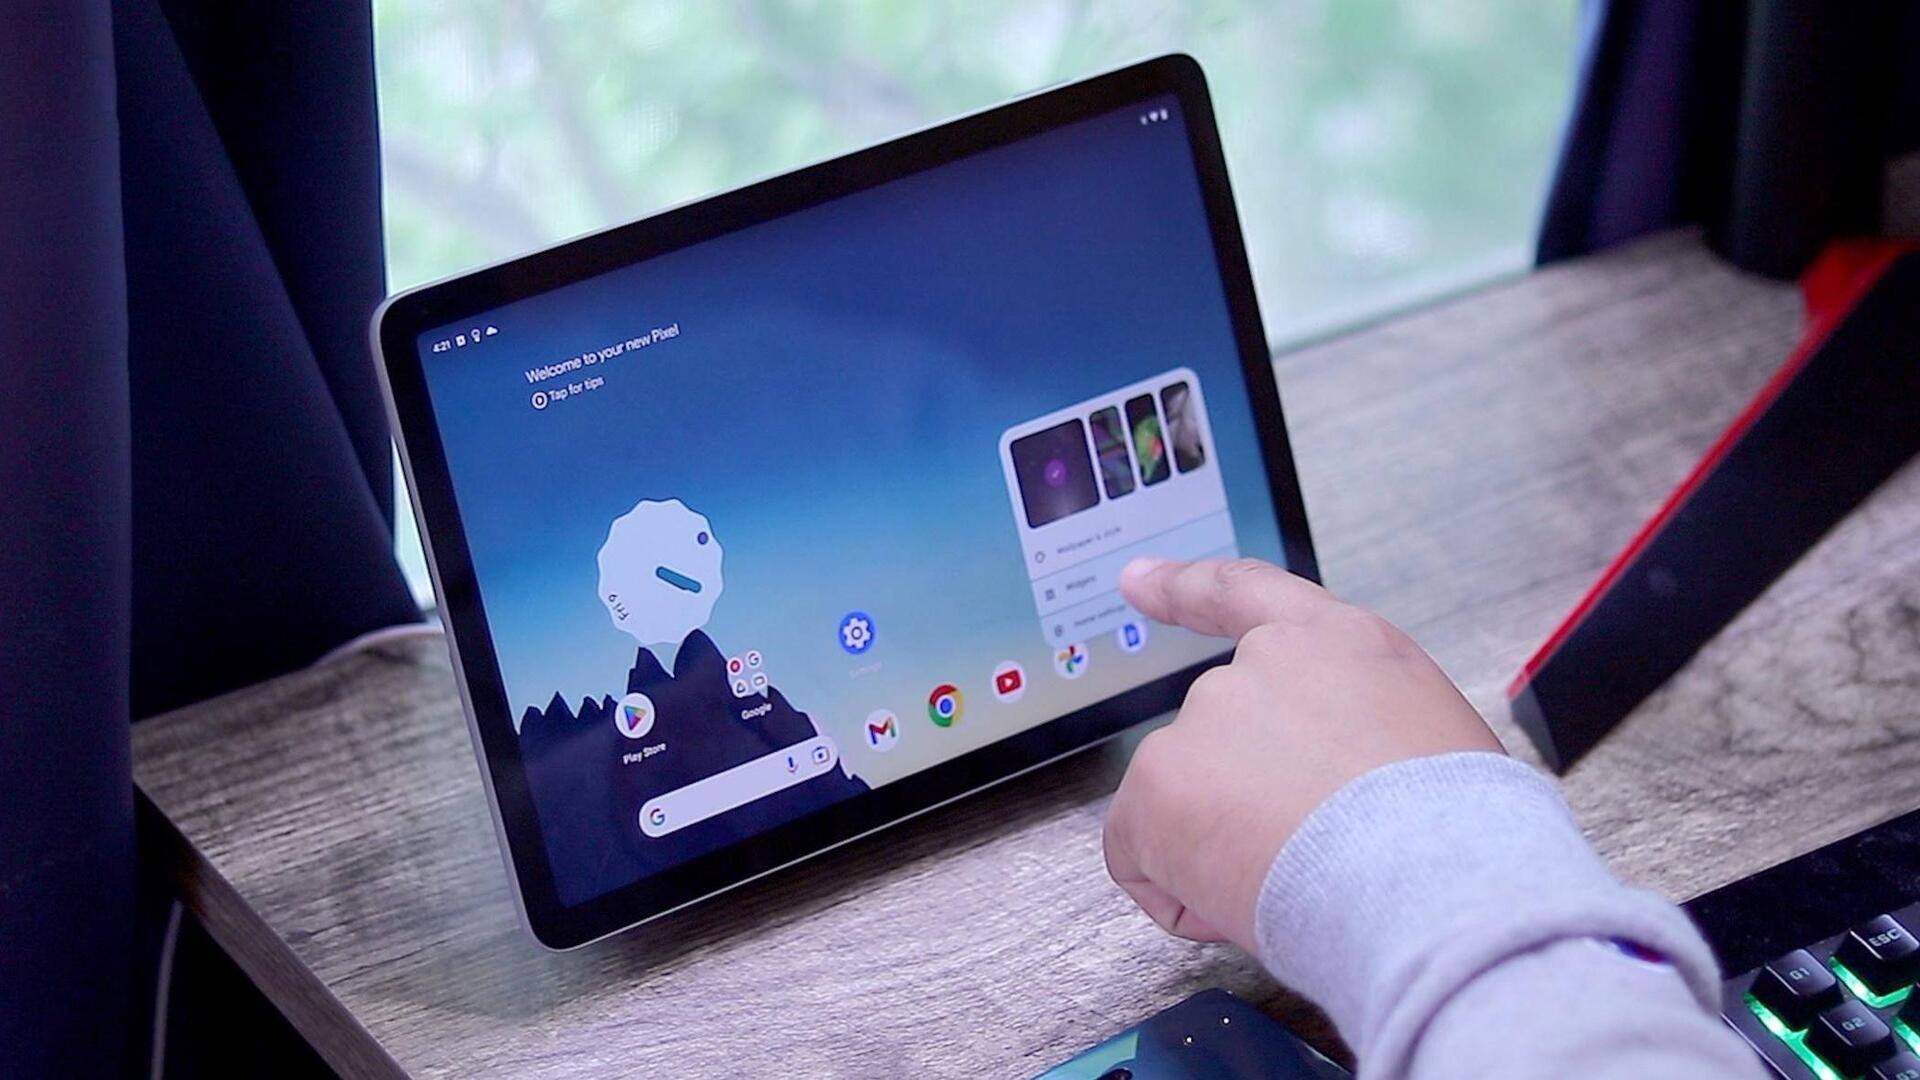 Google's Gboard introduces Assistant voice typing toolbar on Pixel tablet